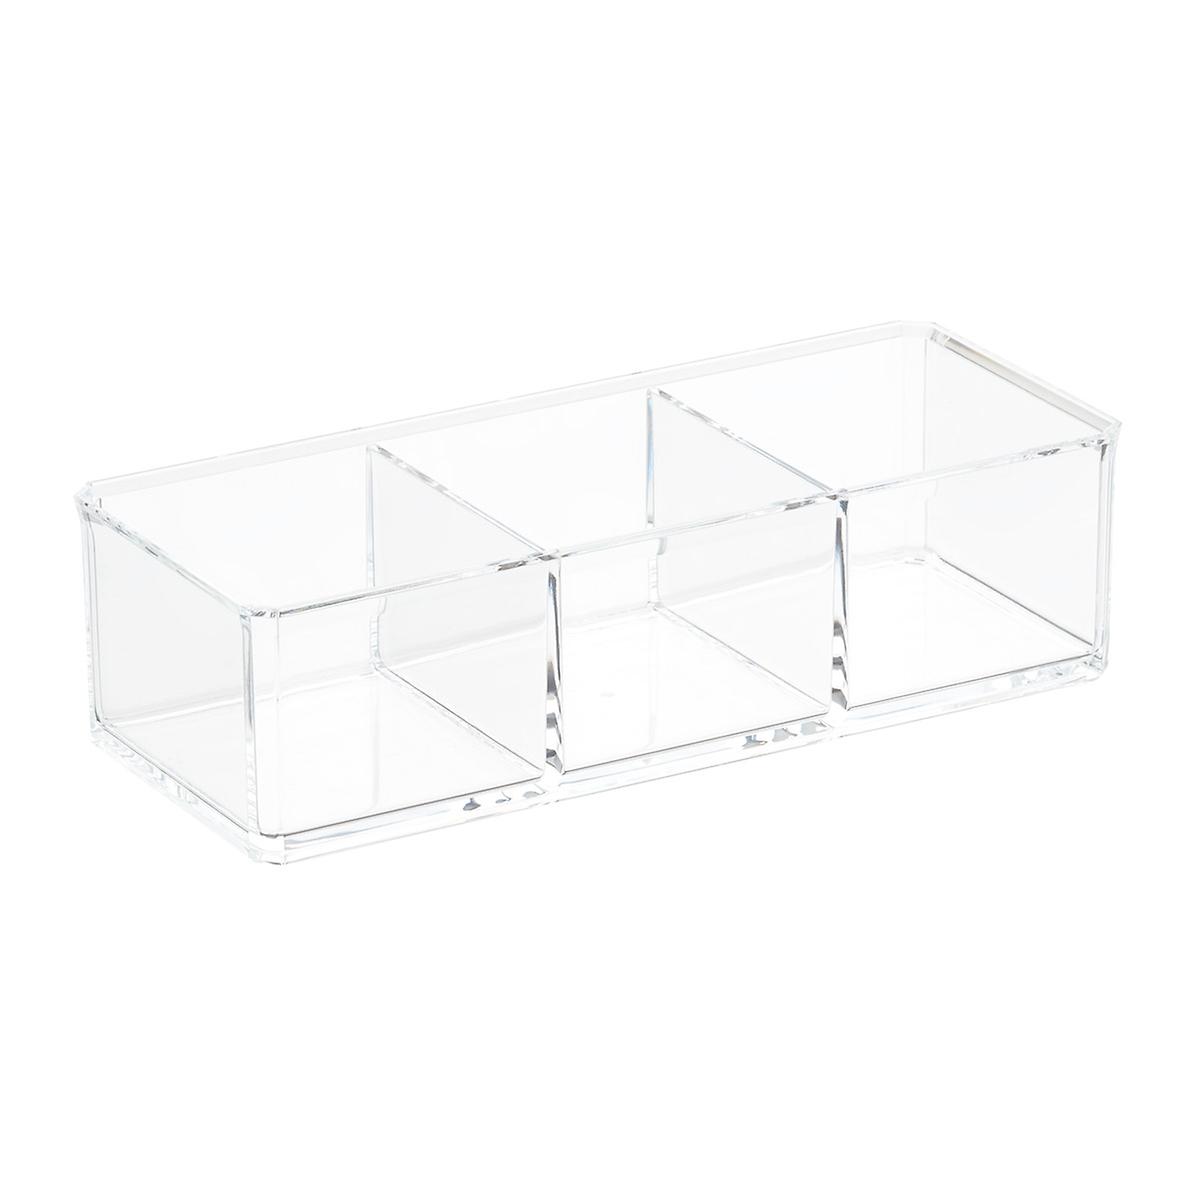 3-Section Acrylic Edge Stacking Bin | The Container Store